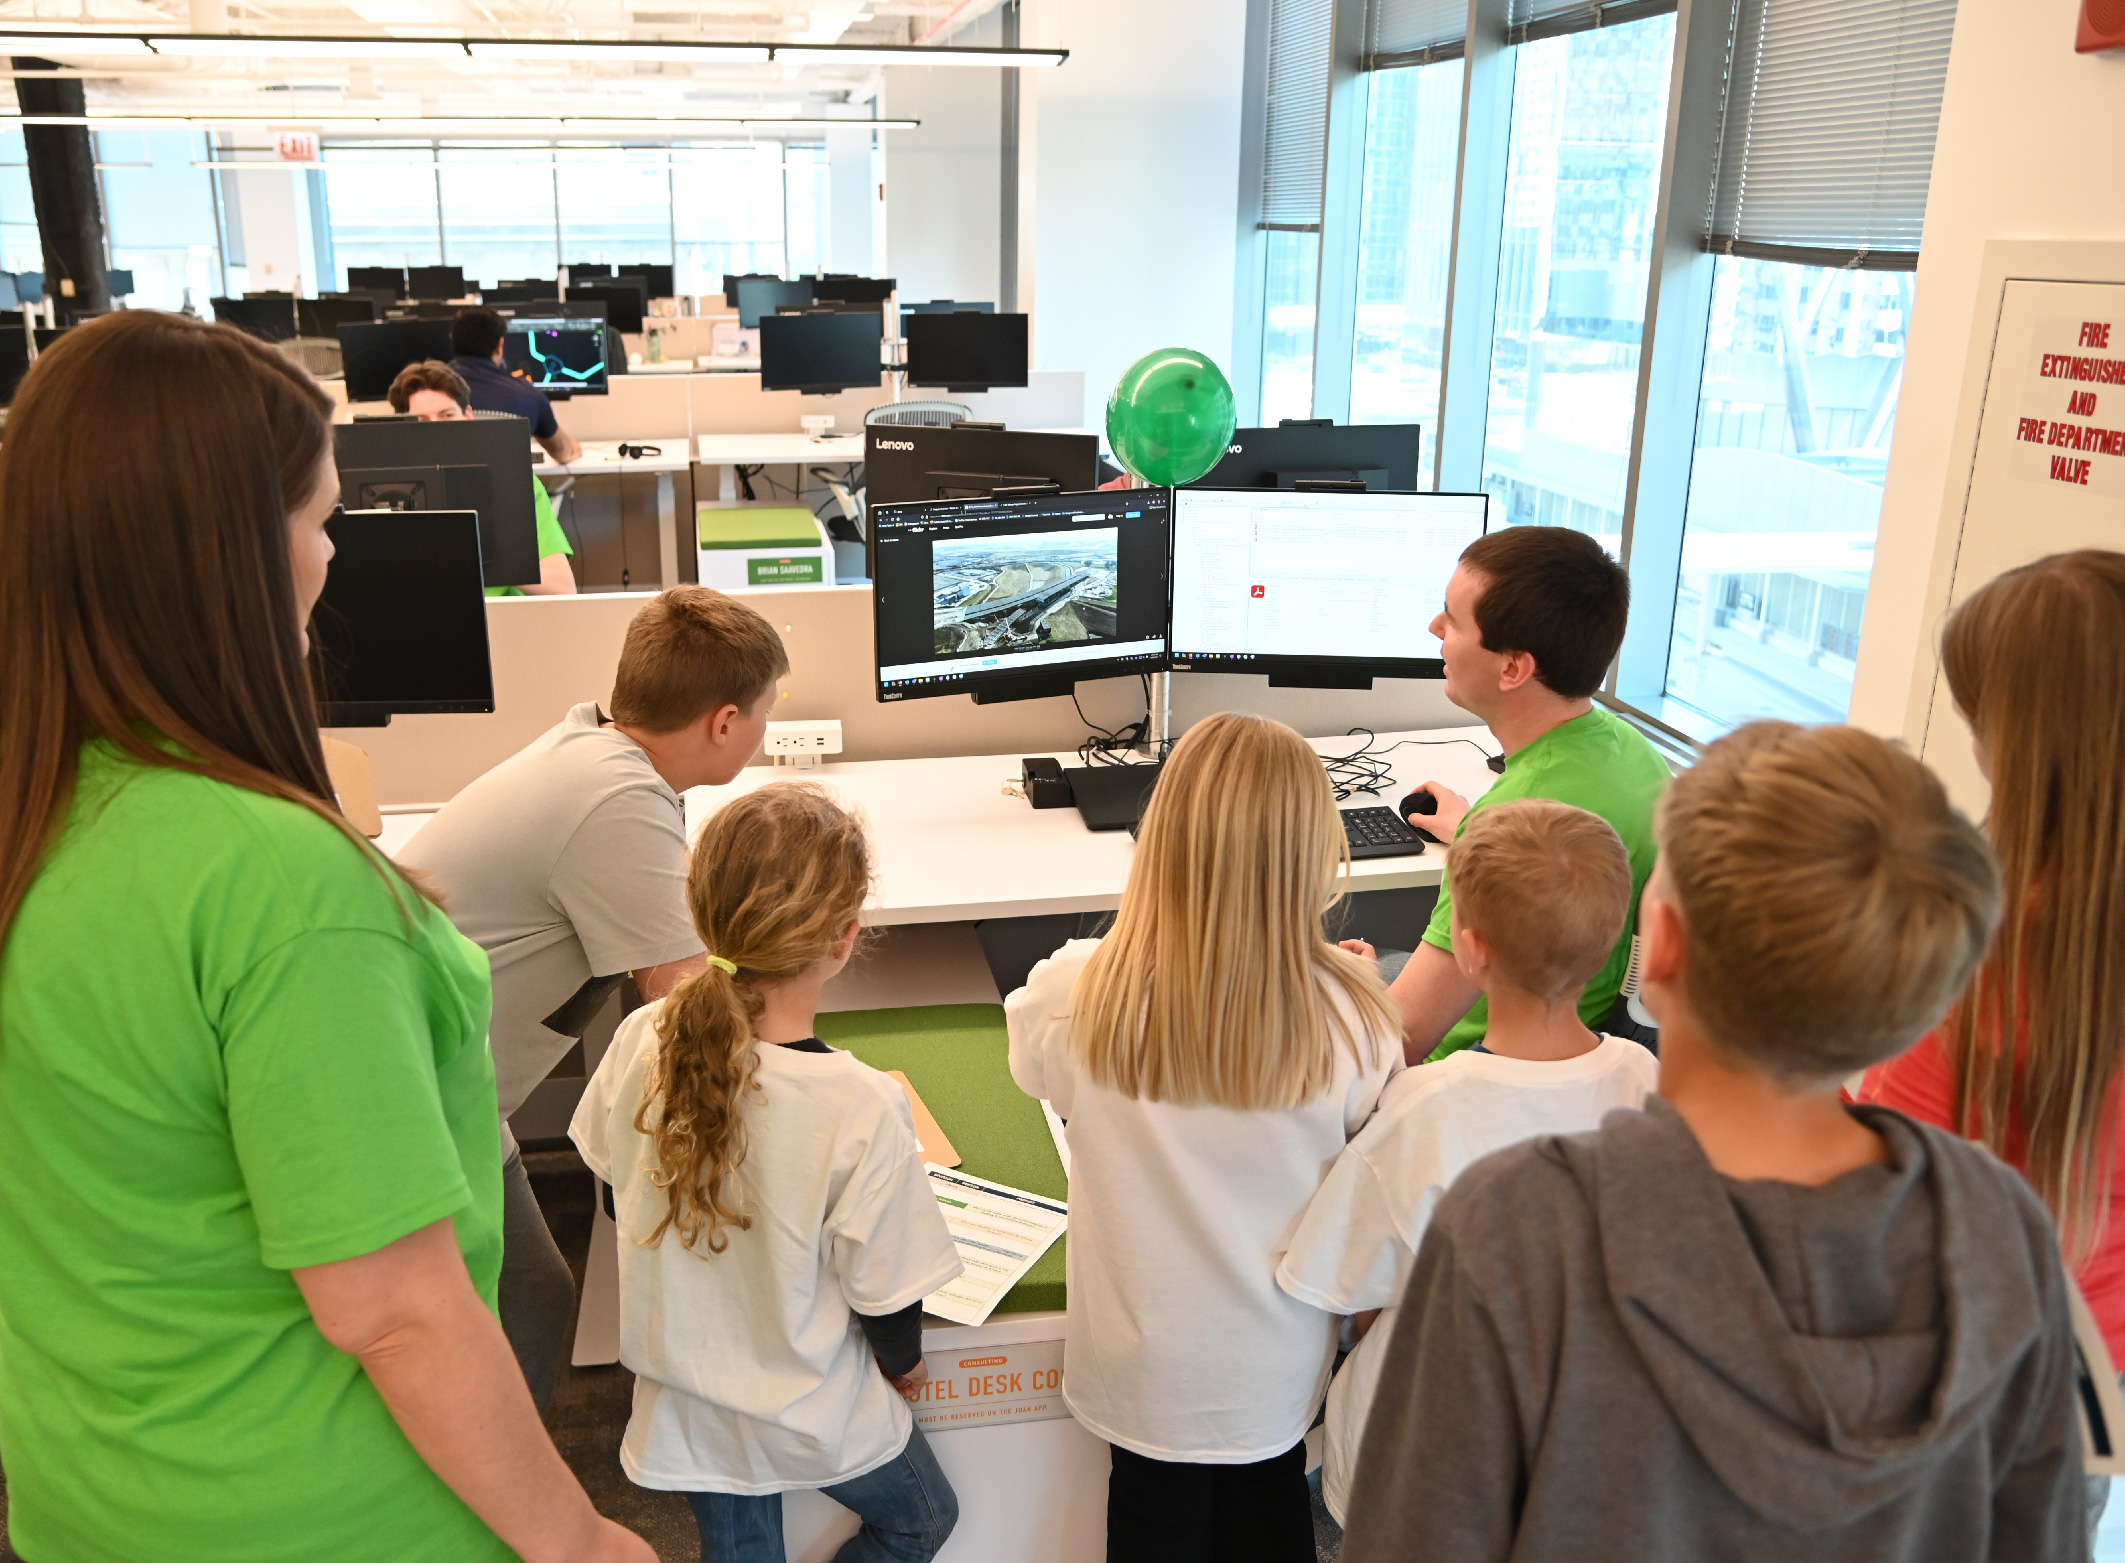 Our Chicago Office Celebrates Take Our Daughters and Sons to Work Day